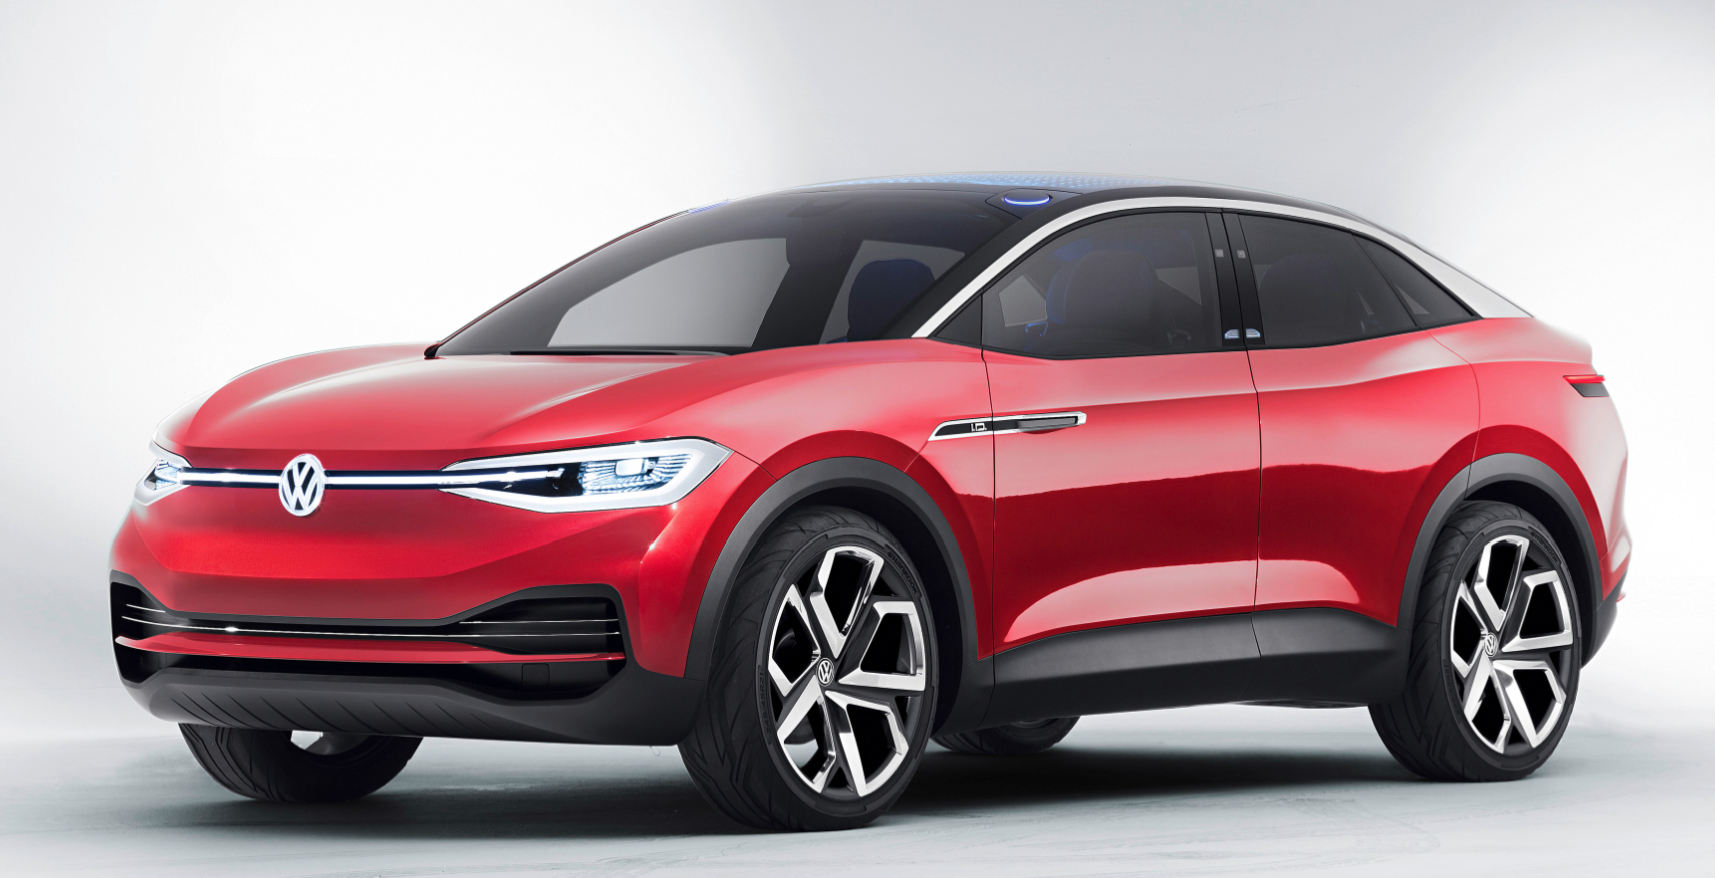 2017 Los Angeles Auto Show Volkswagen Id Crozz Concept The Daily